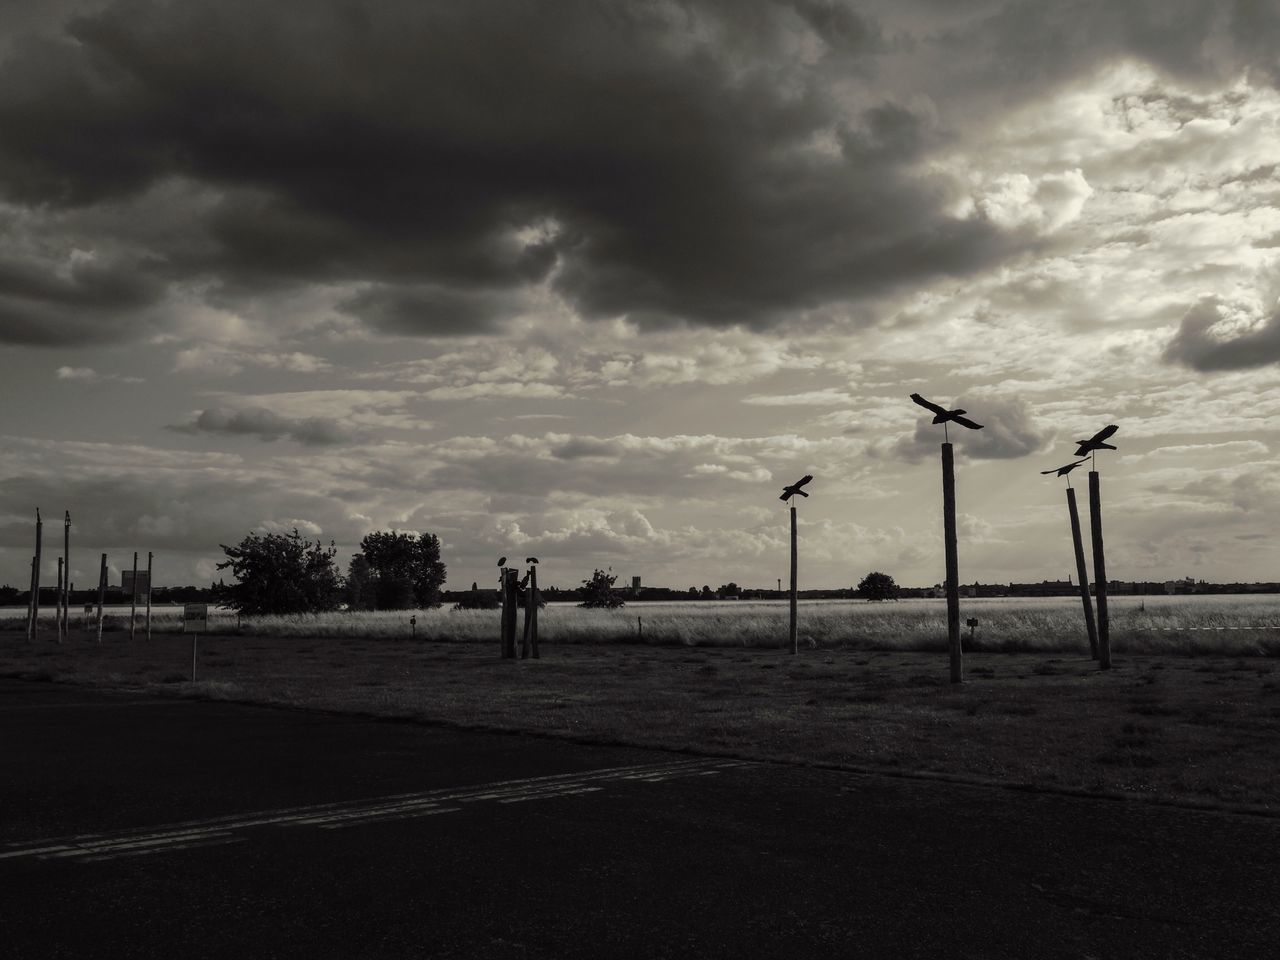 sky, cloud - sky, cloudy, street light, cloud, tranquility, weather, tranquil scene, nature, overcast, beach, transportation, silhouette, scenics, road, sea, outdoors, incidental people, beauty in nature, day